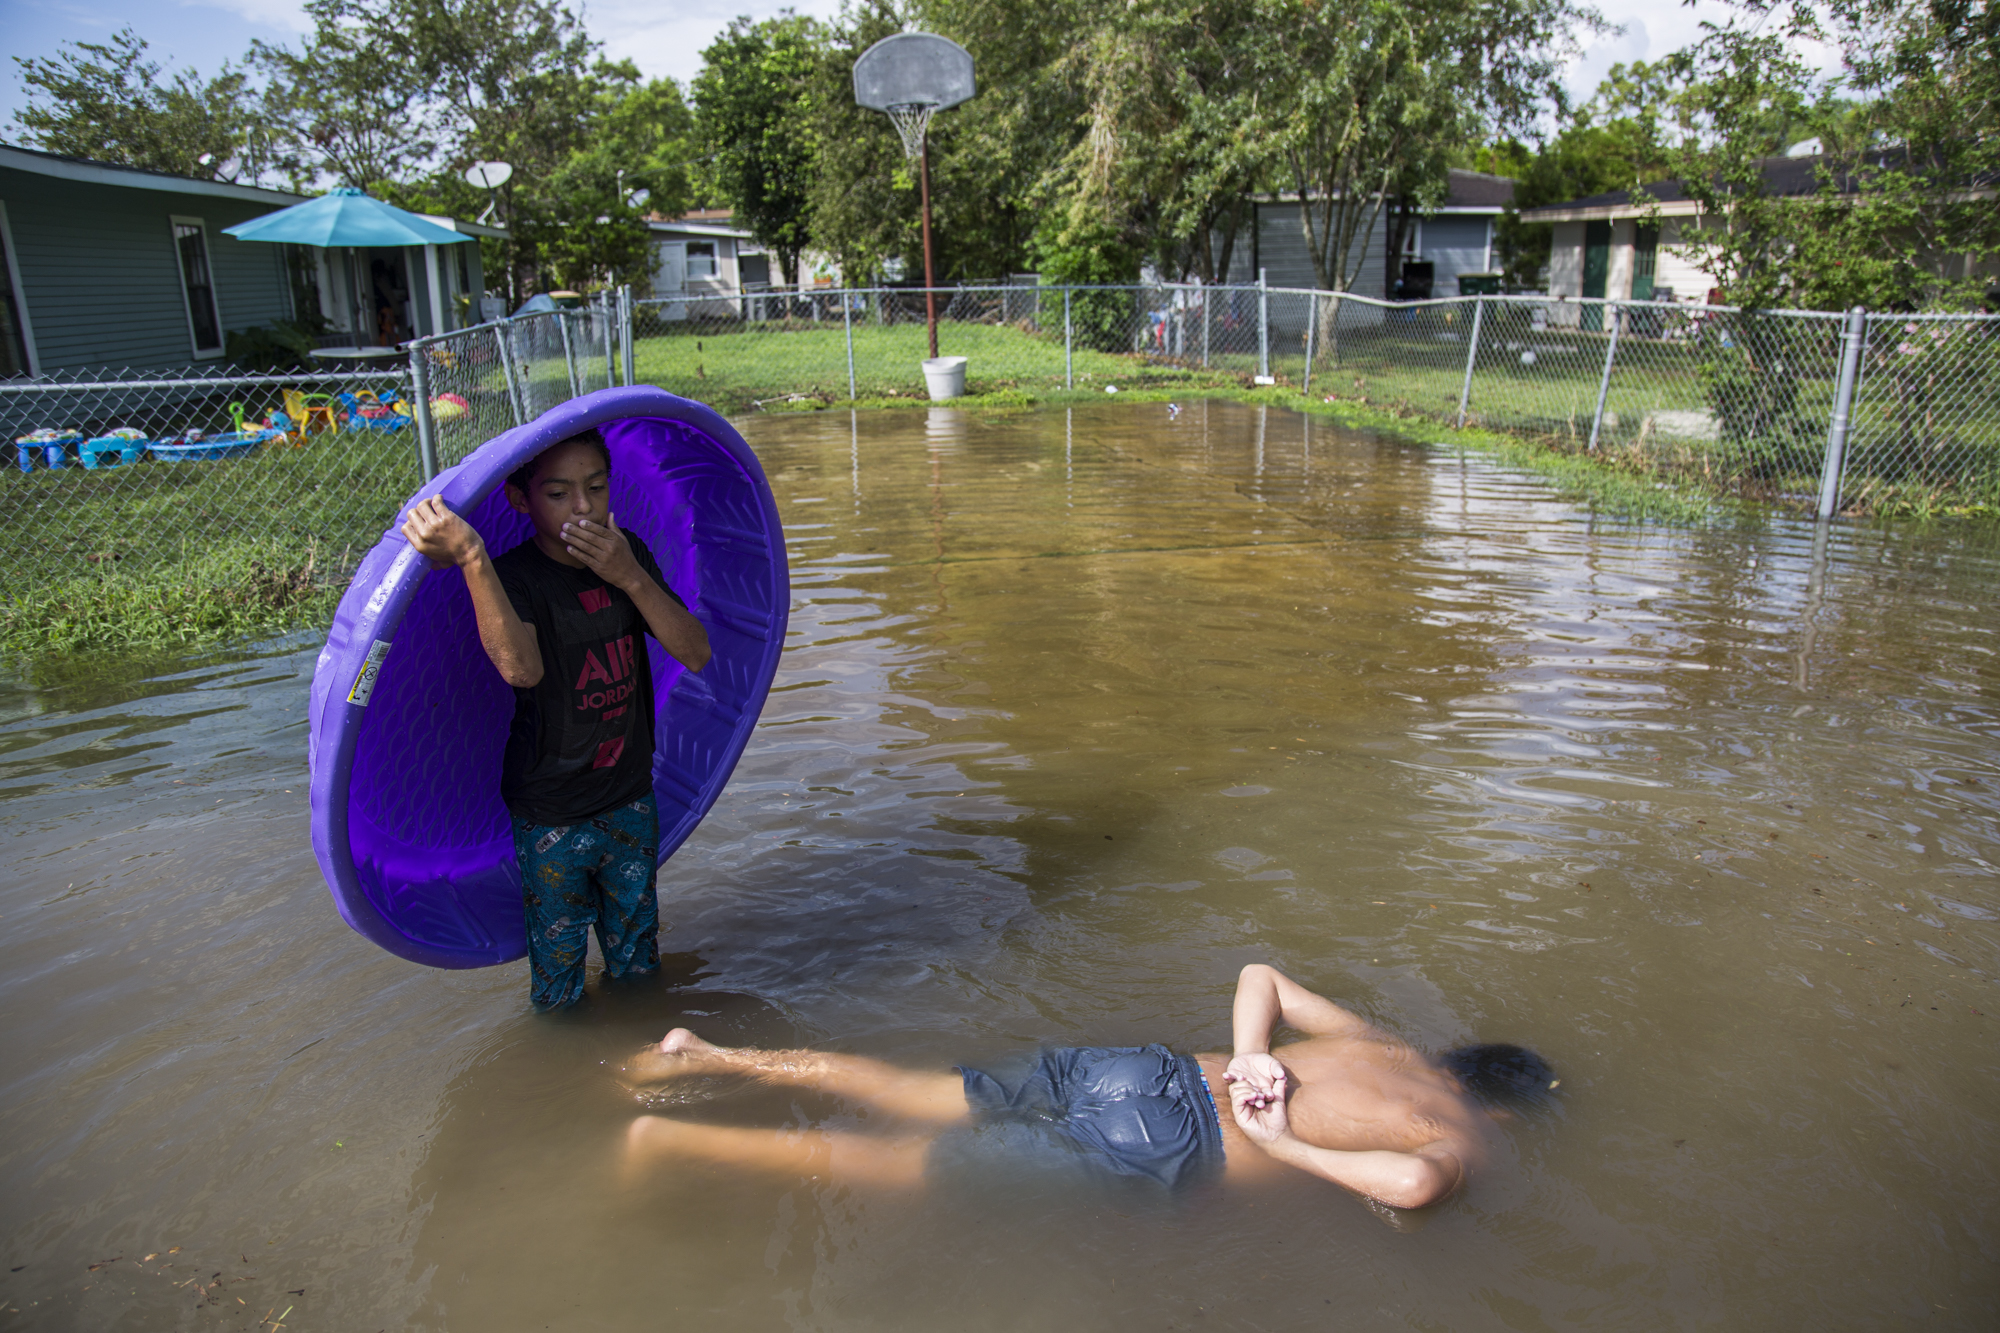  Jeffery Kichen, 9, left, counts out loud to keep track of how long Xavier Salazar, 12, can hold his breath underwater. The city of Victoria, Texas was hit with a rain storm that caused sudden flooding throughout the city due to the already over-satu